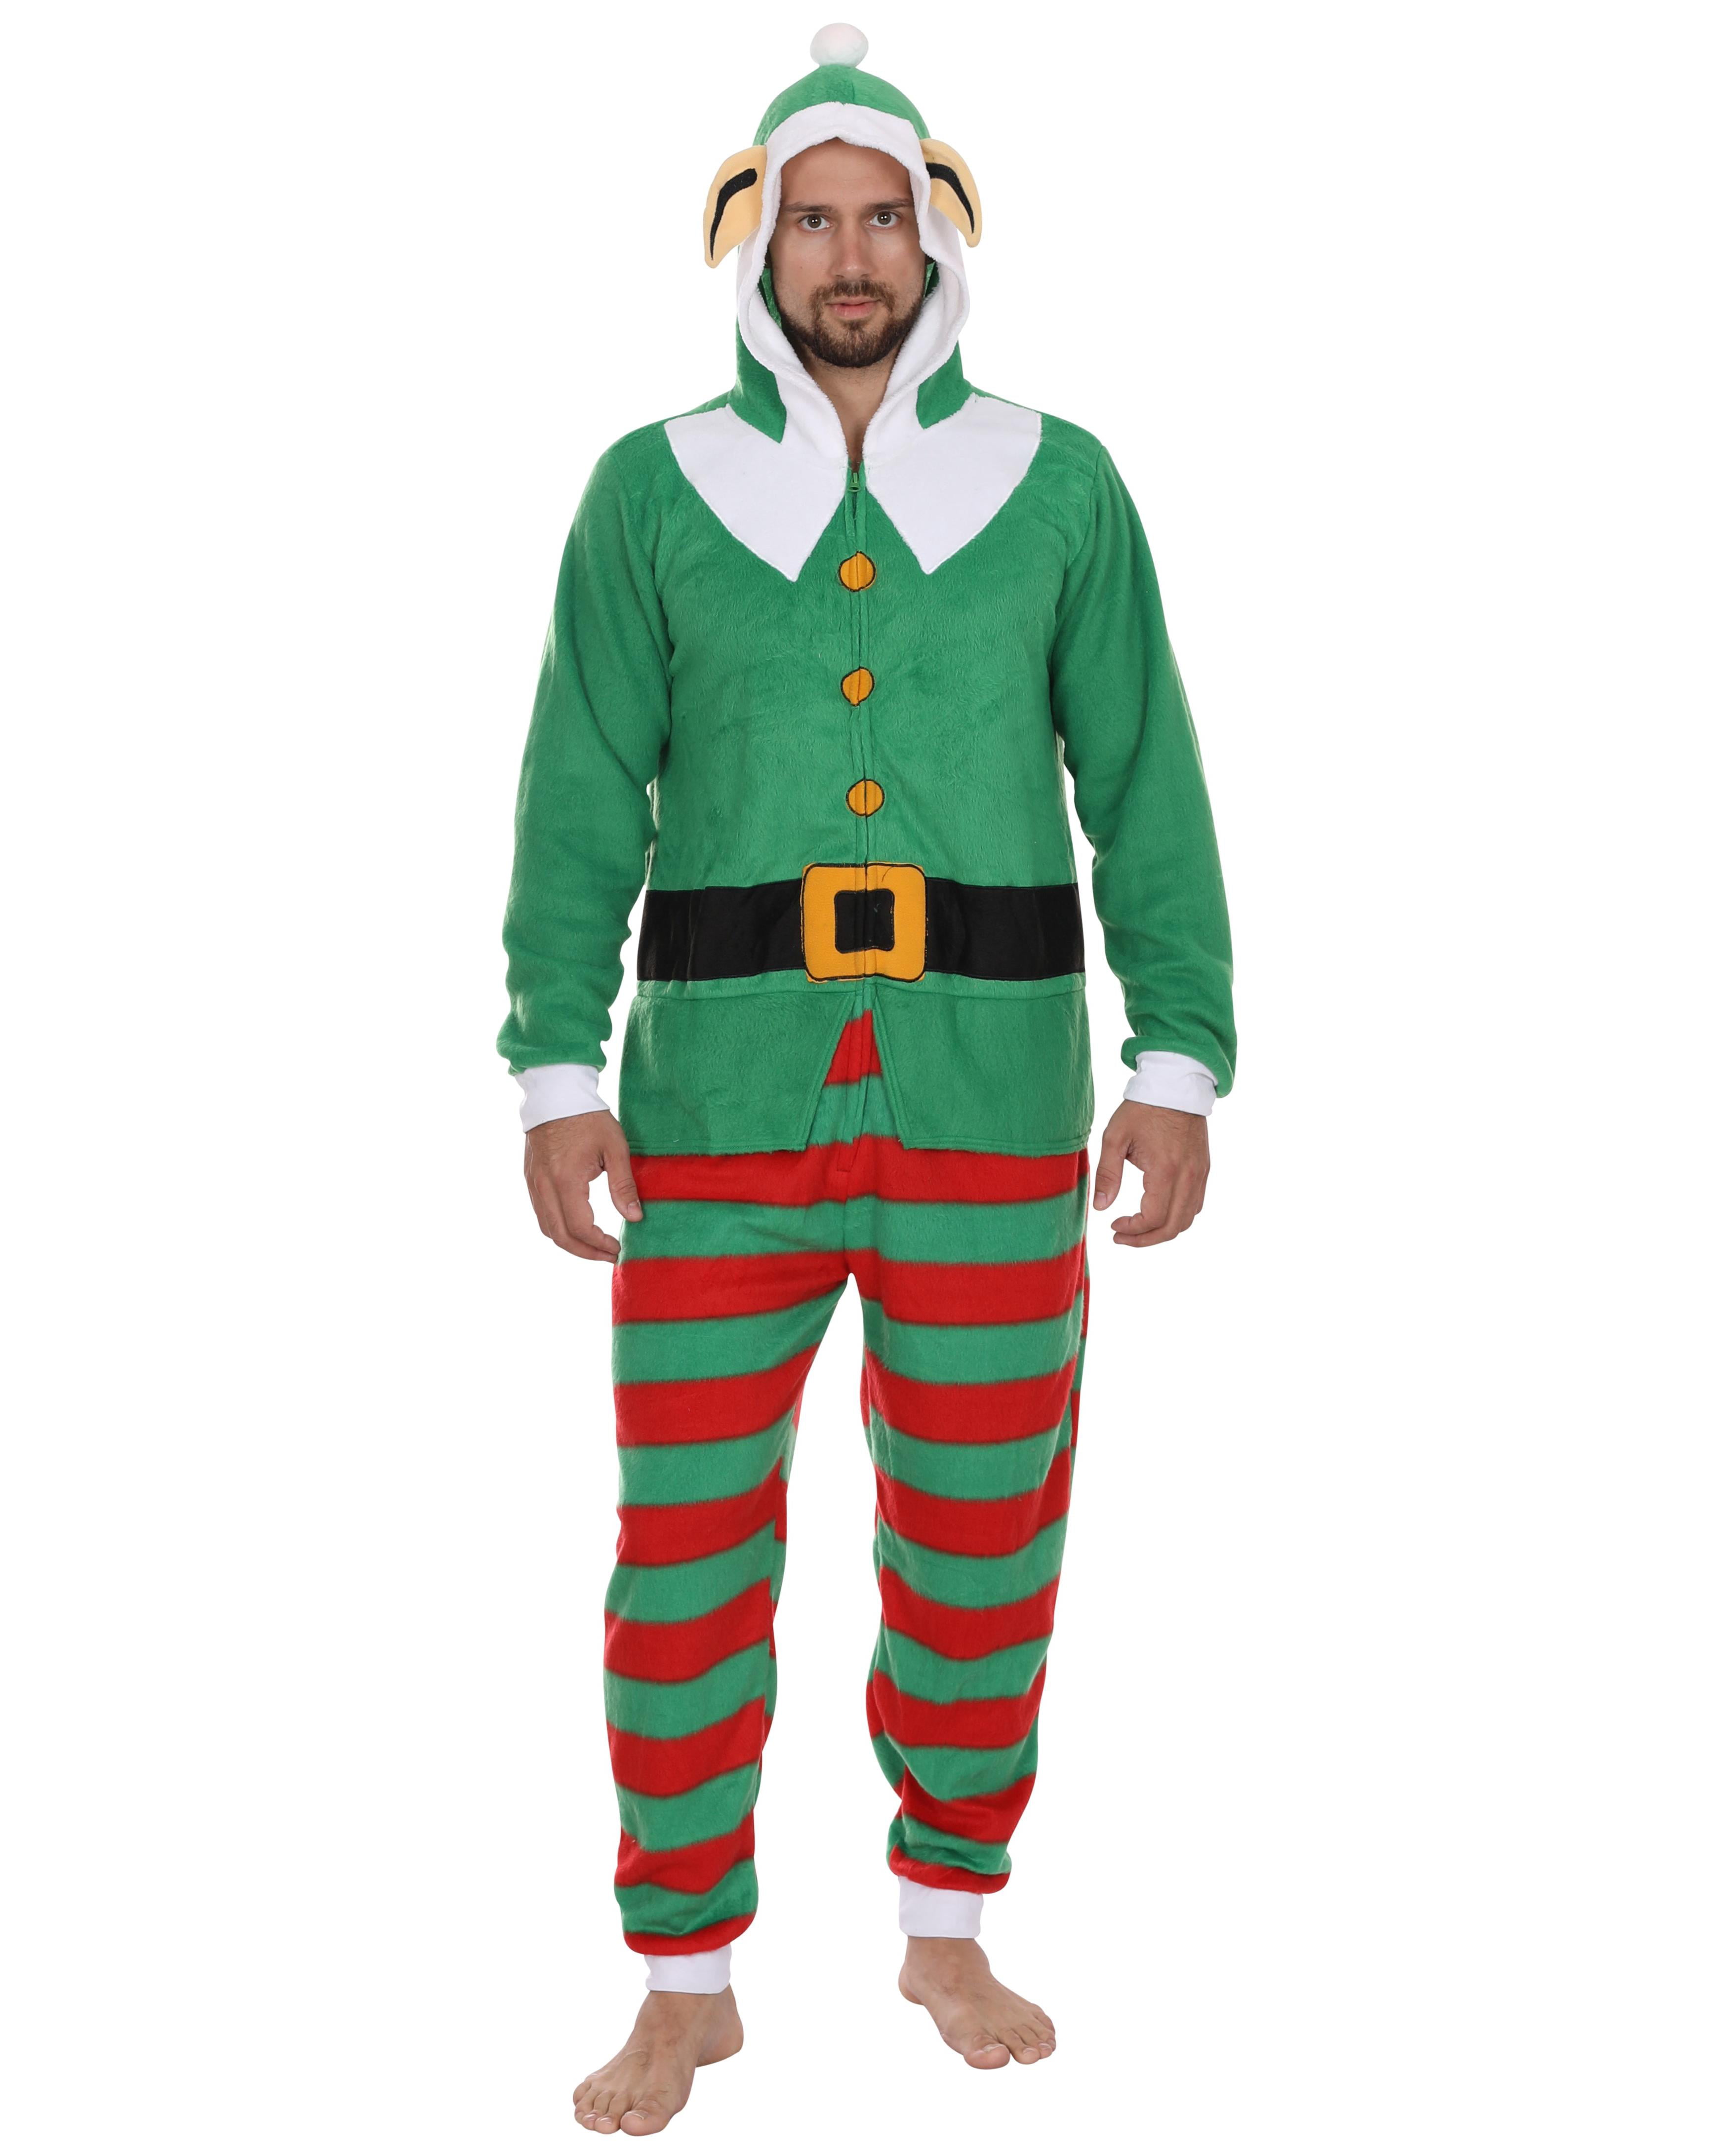 NWT Men's Ugly Christmas Union Suit Elf Baby Size M 